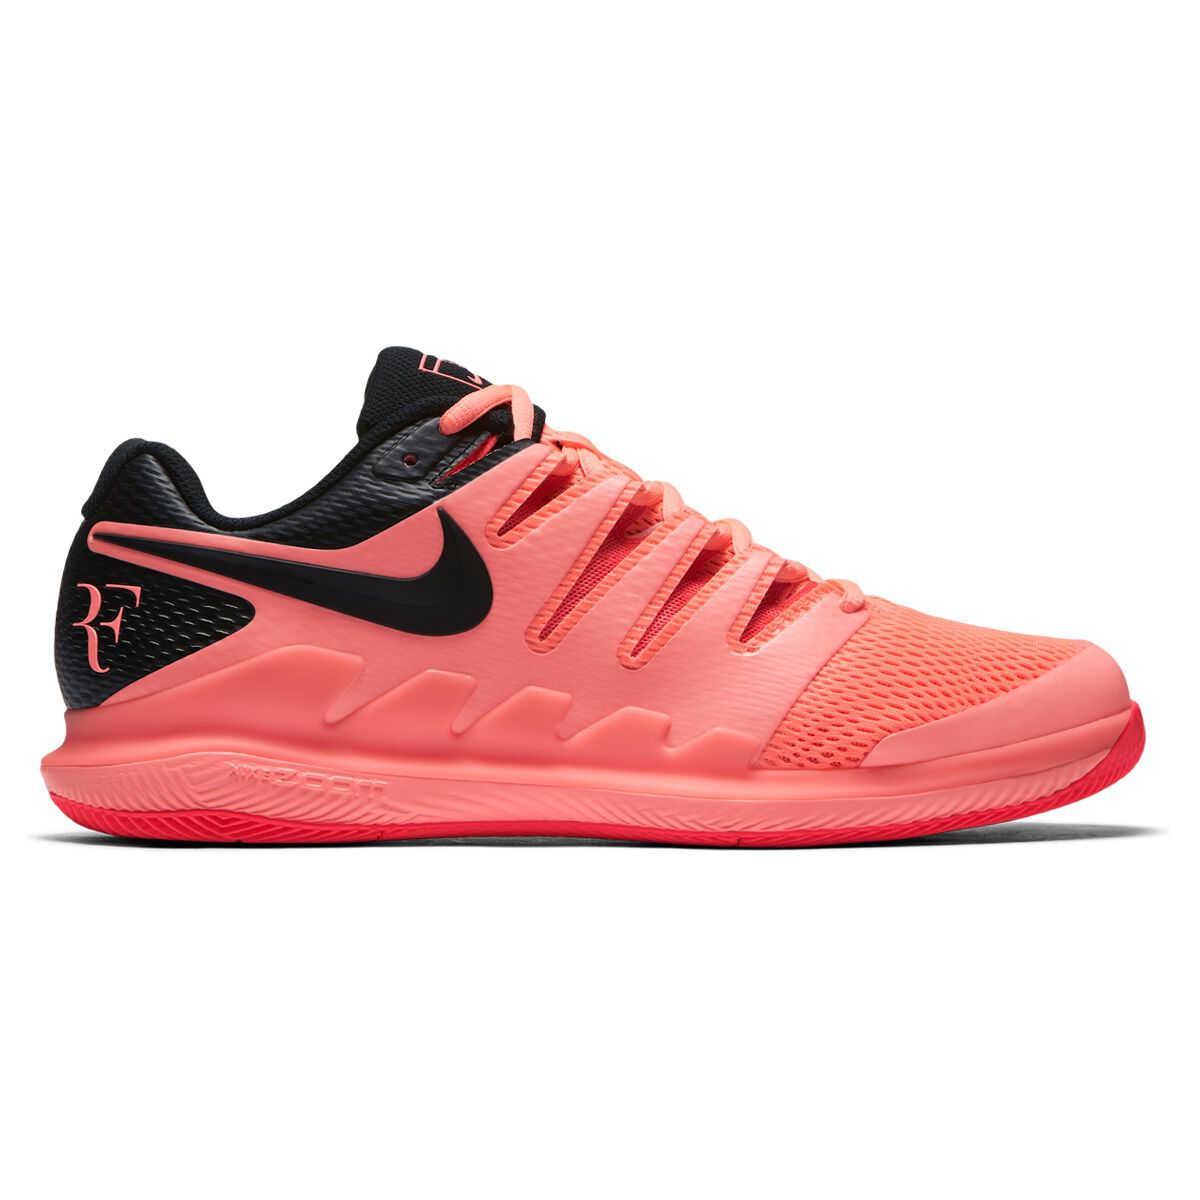 mens pink tennis shoes